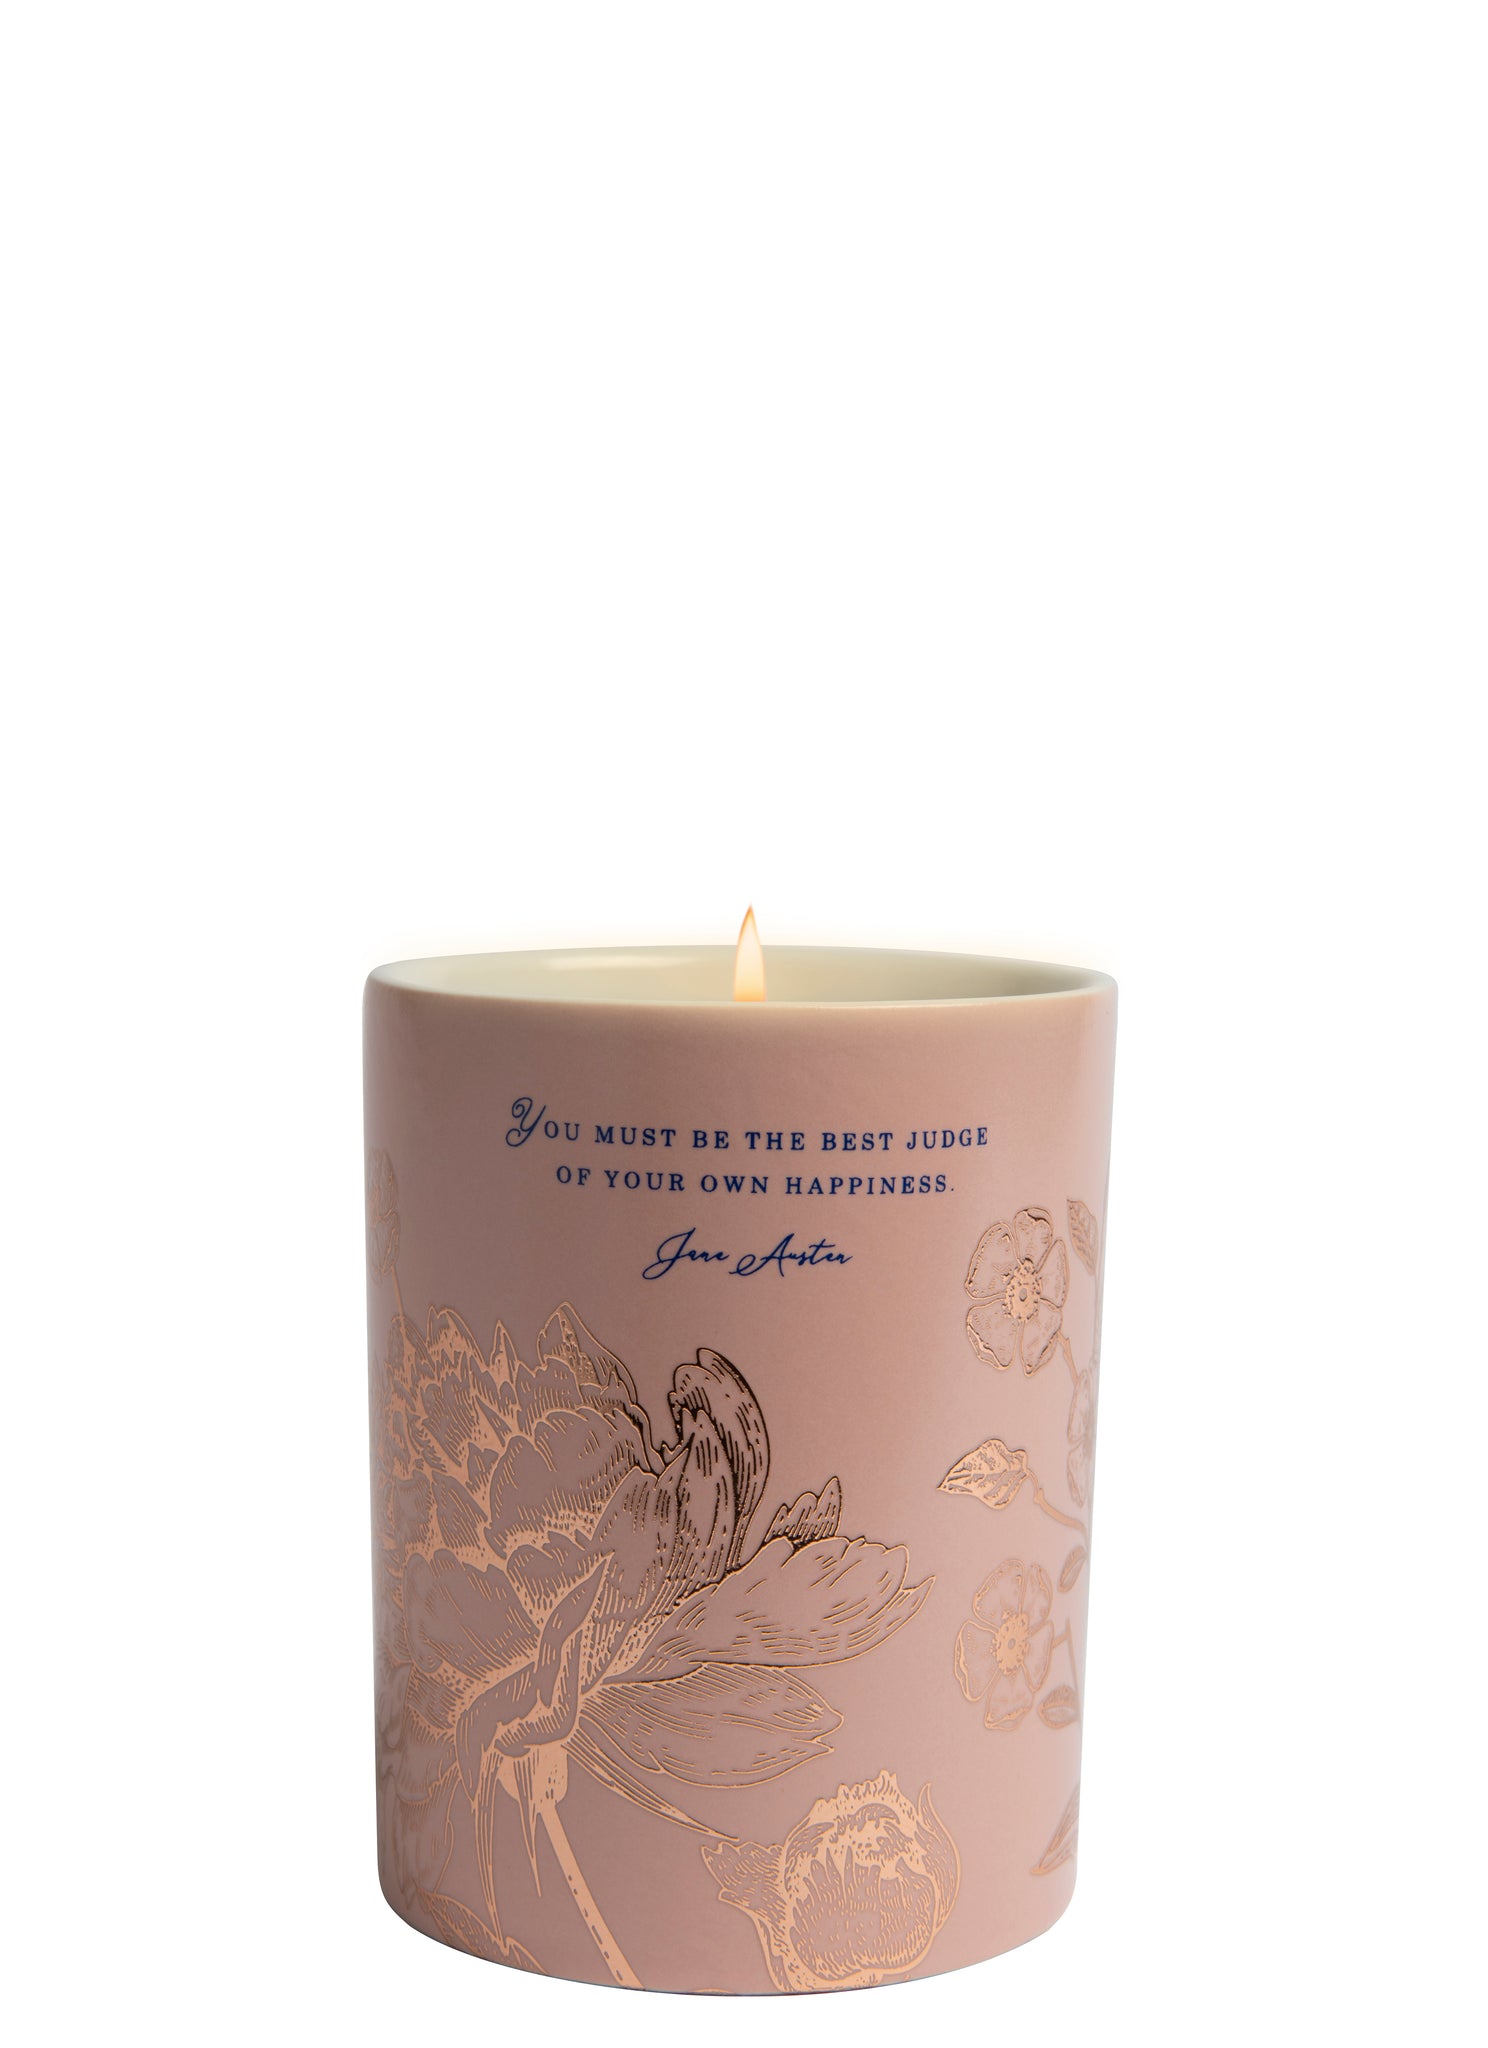 Jane Austen: Be The Best Judge Scented Candle (8.5 oz.) – Insight Editions